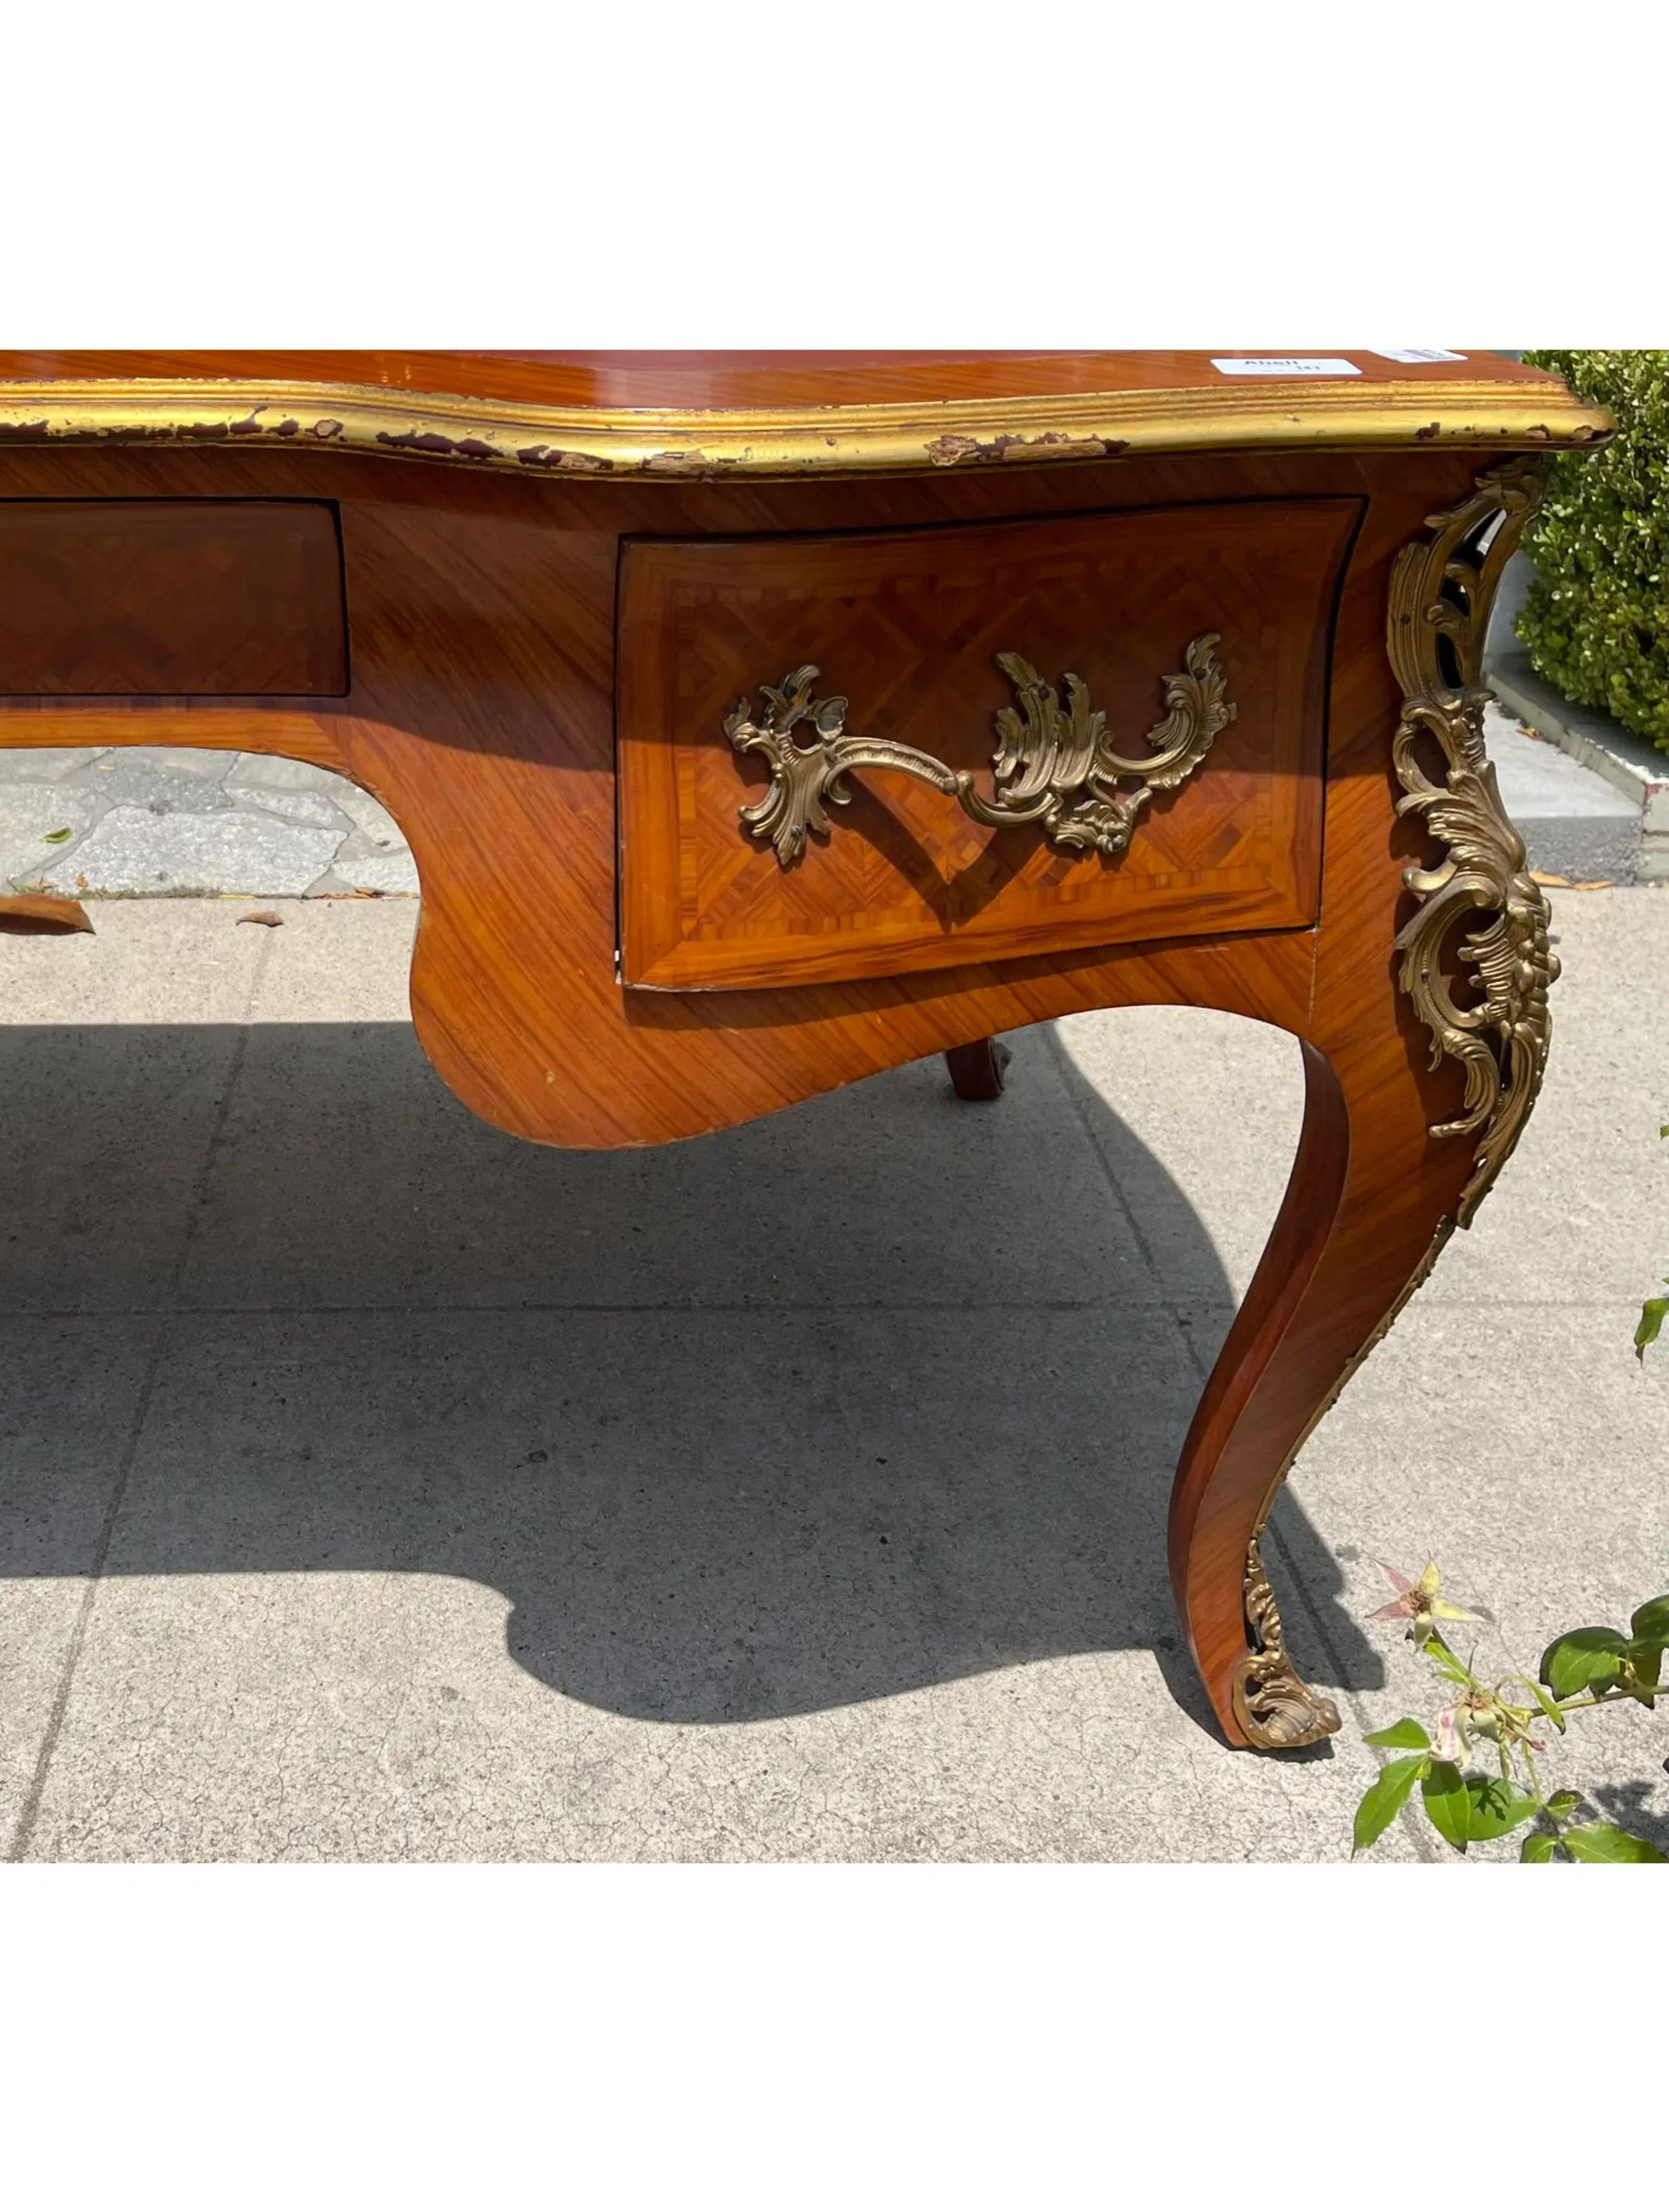 20th Century 18th C Style Parquetry Inlaid & Giltwood Bureau Plat Writing Table Desk